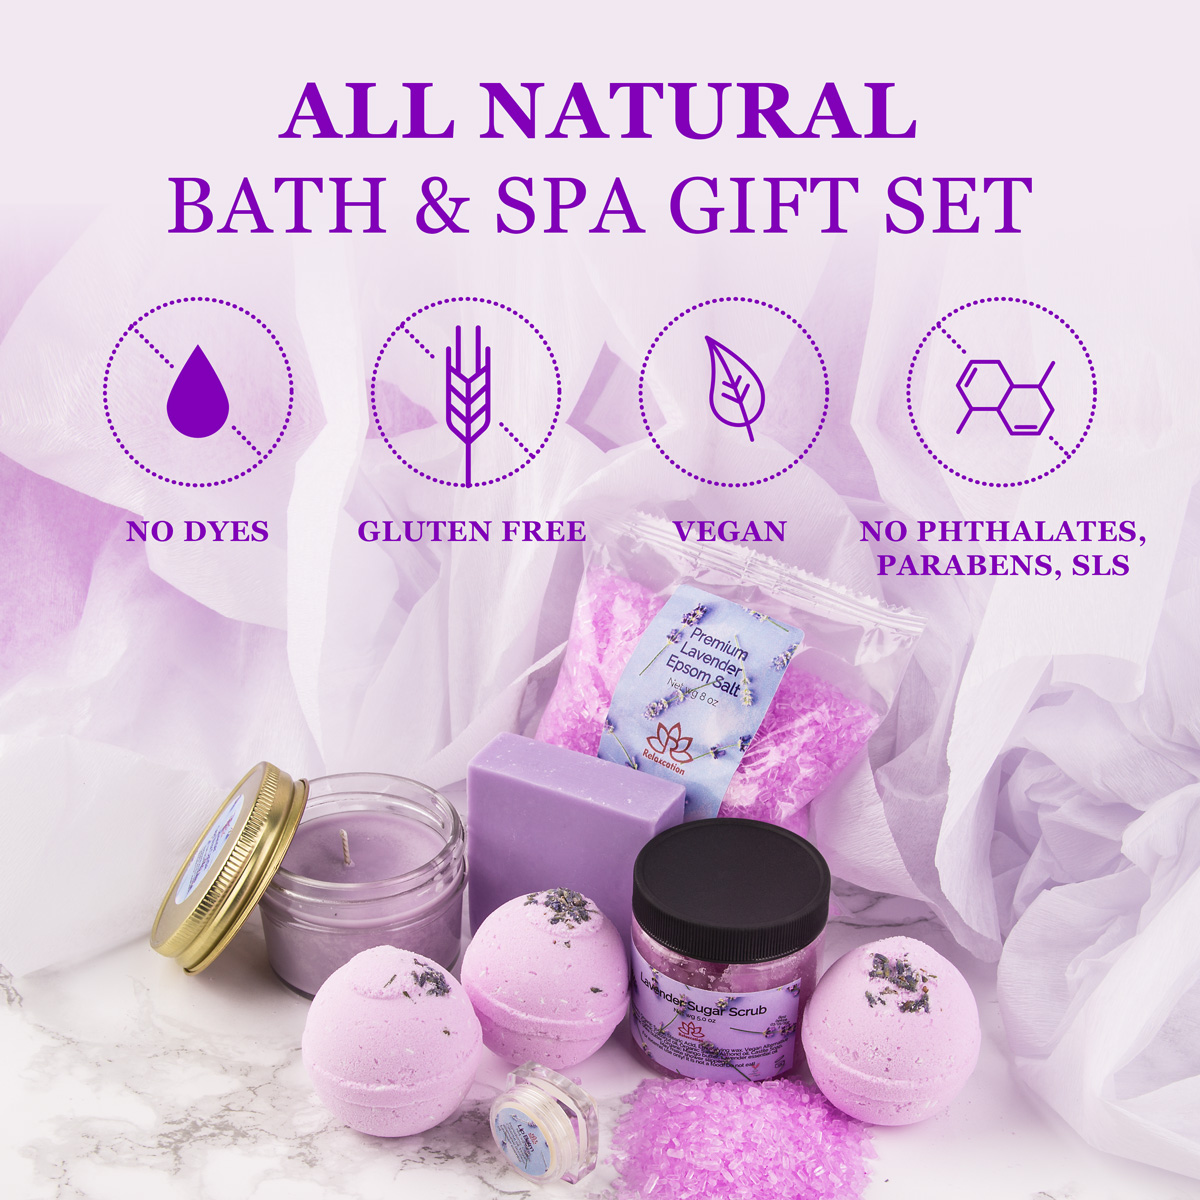 Lavender Spa Gift Set for Women Organic Home Spa Bath Basket Handmade in USA Natural and Safe by Relaxcation - image 5 of 8